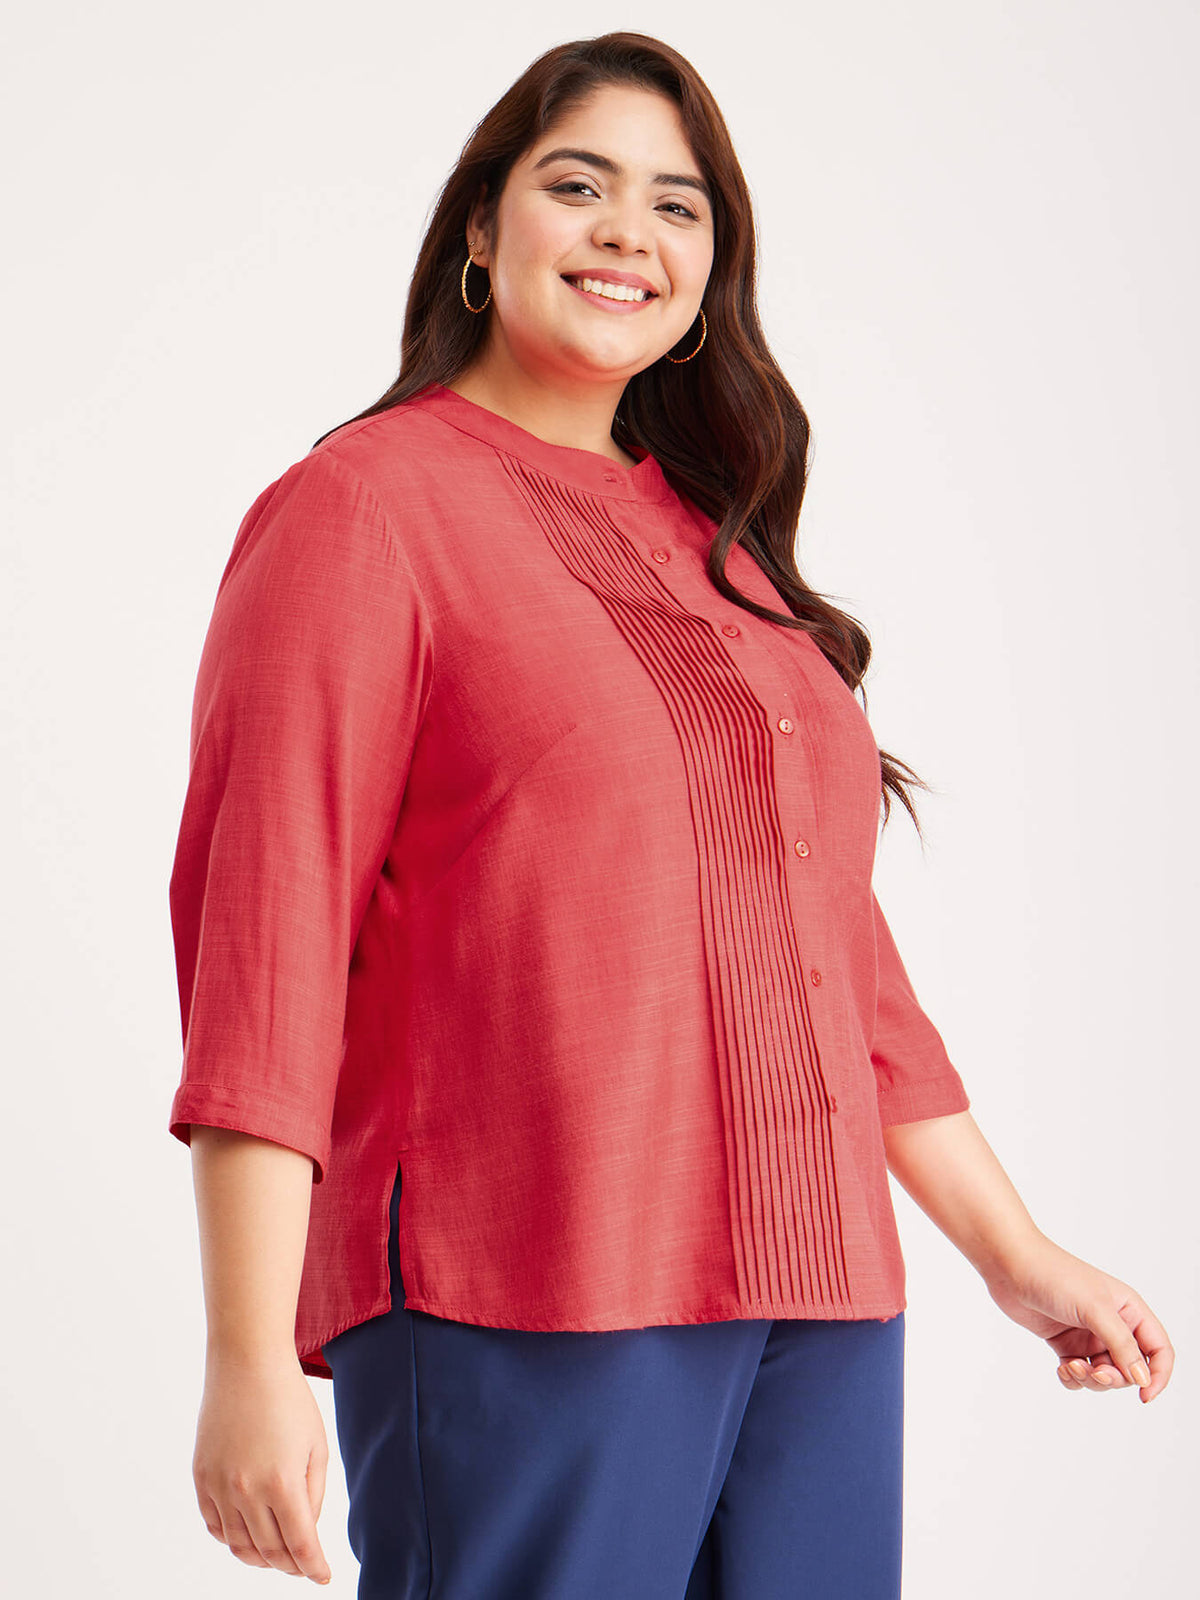 Pintuck Detail Top - Coral Red